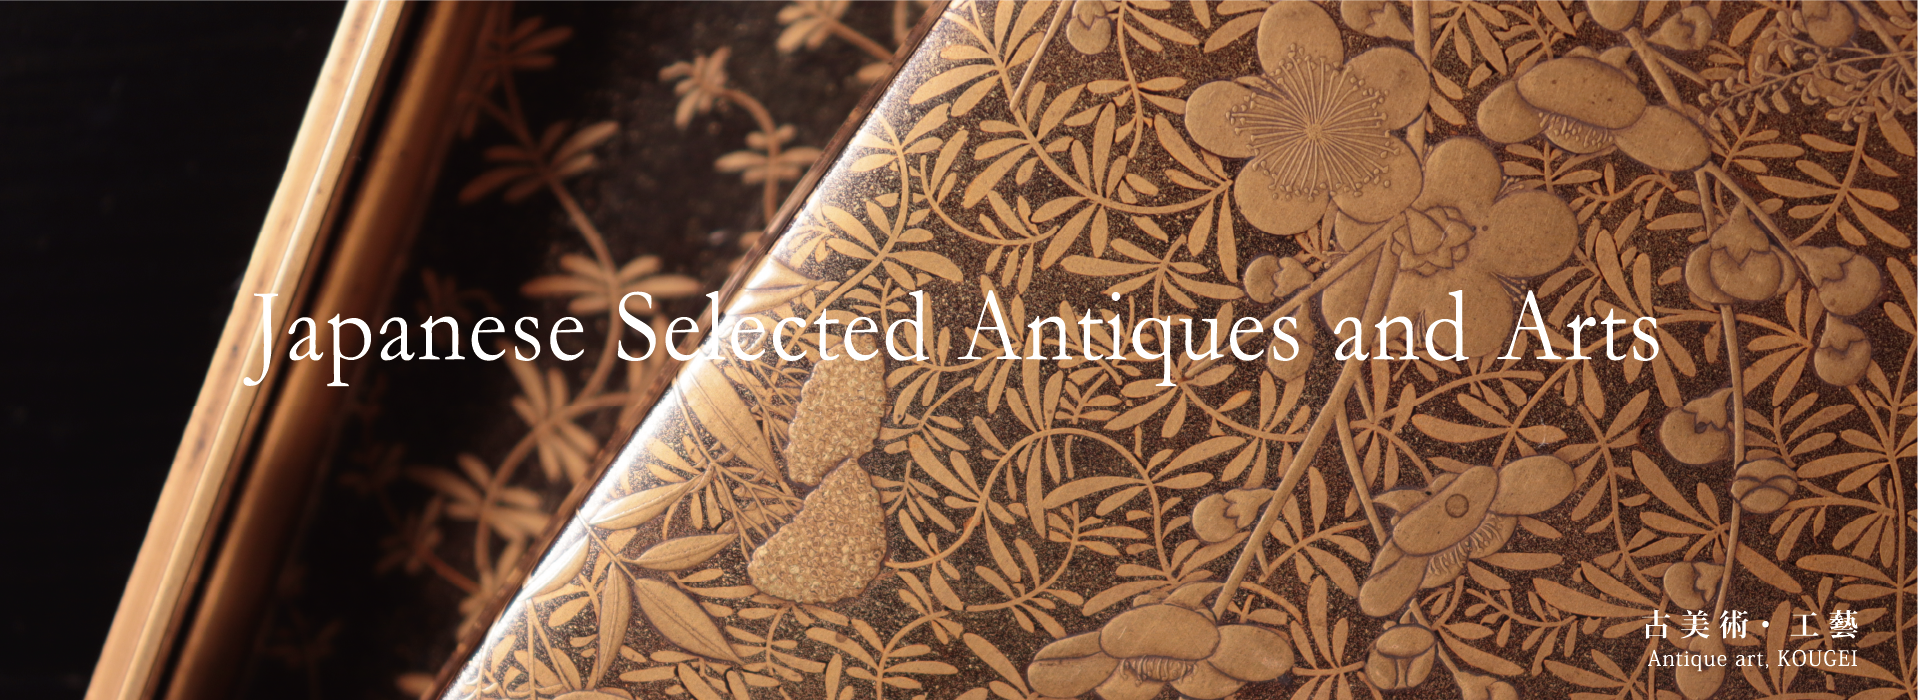 Japanese Selected Antiques and Arts 古美術・工藝 Antique art, KOUGEI